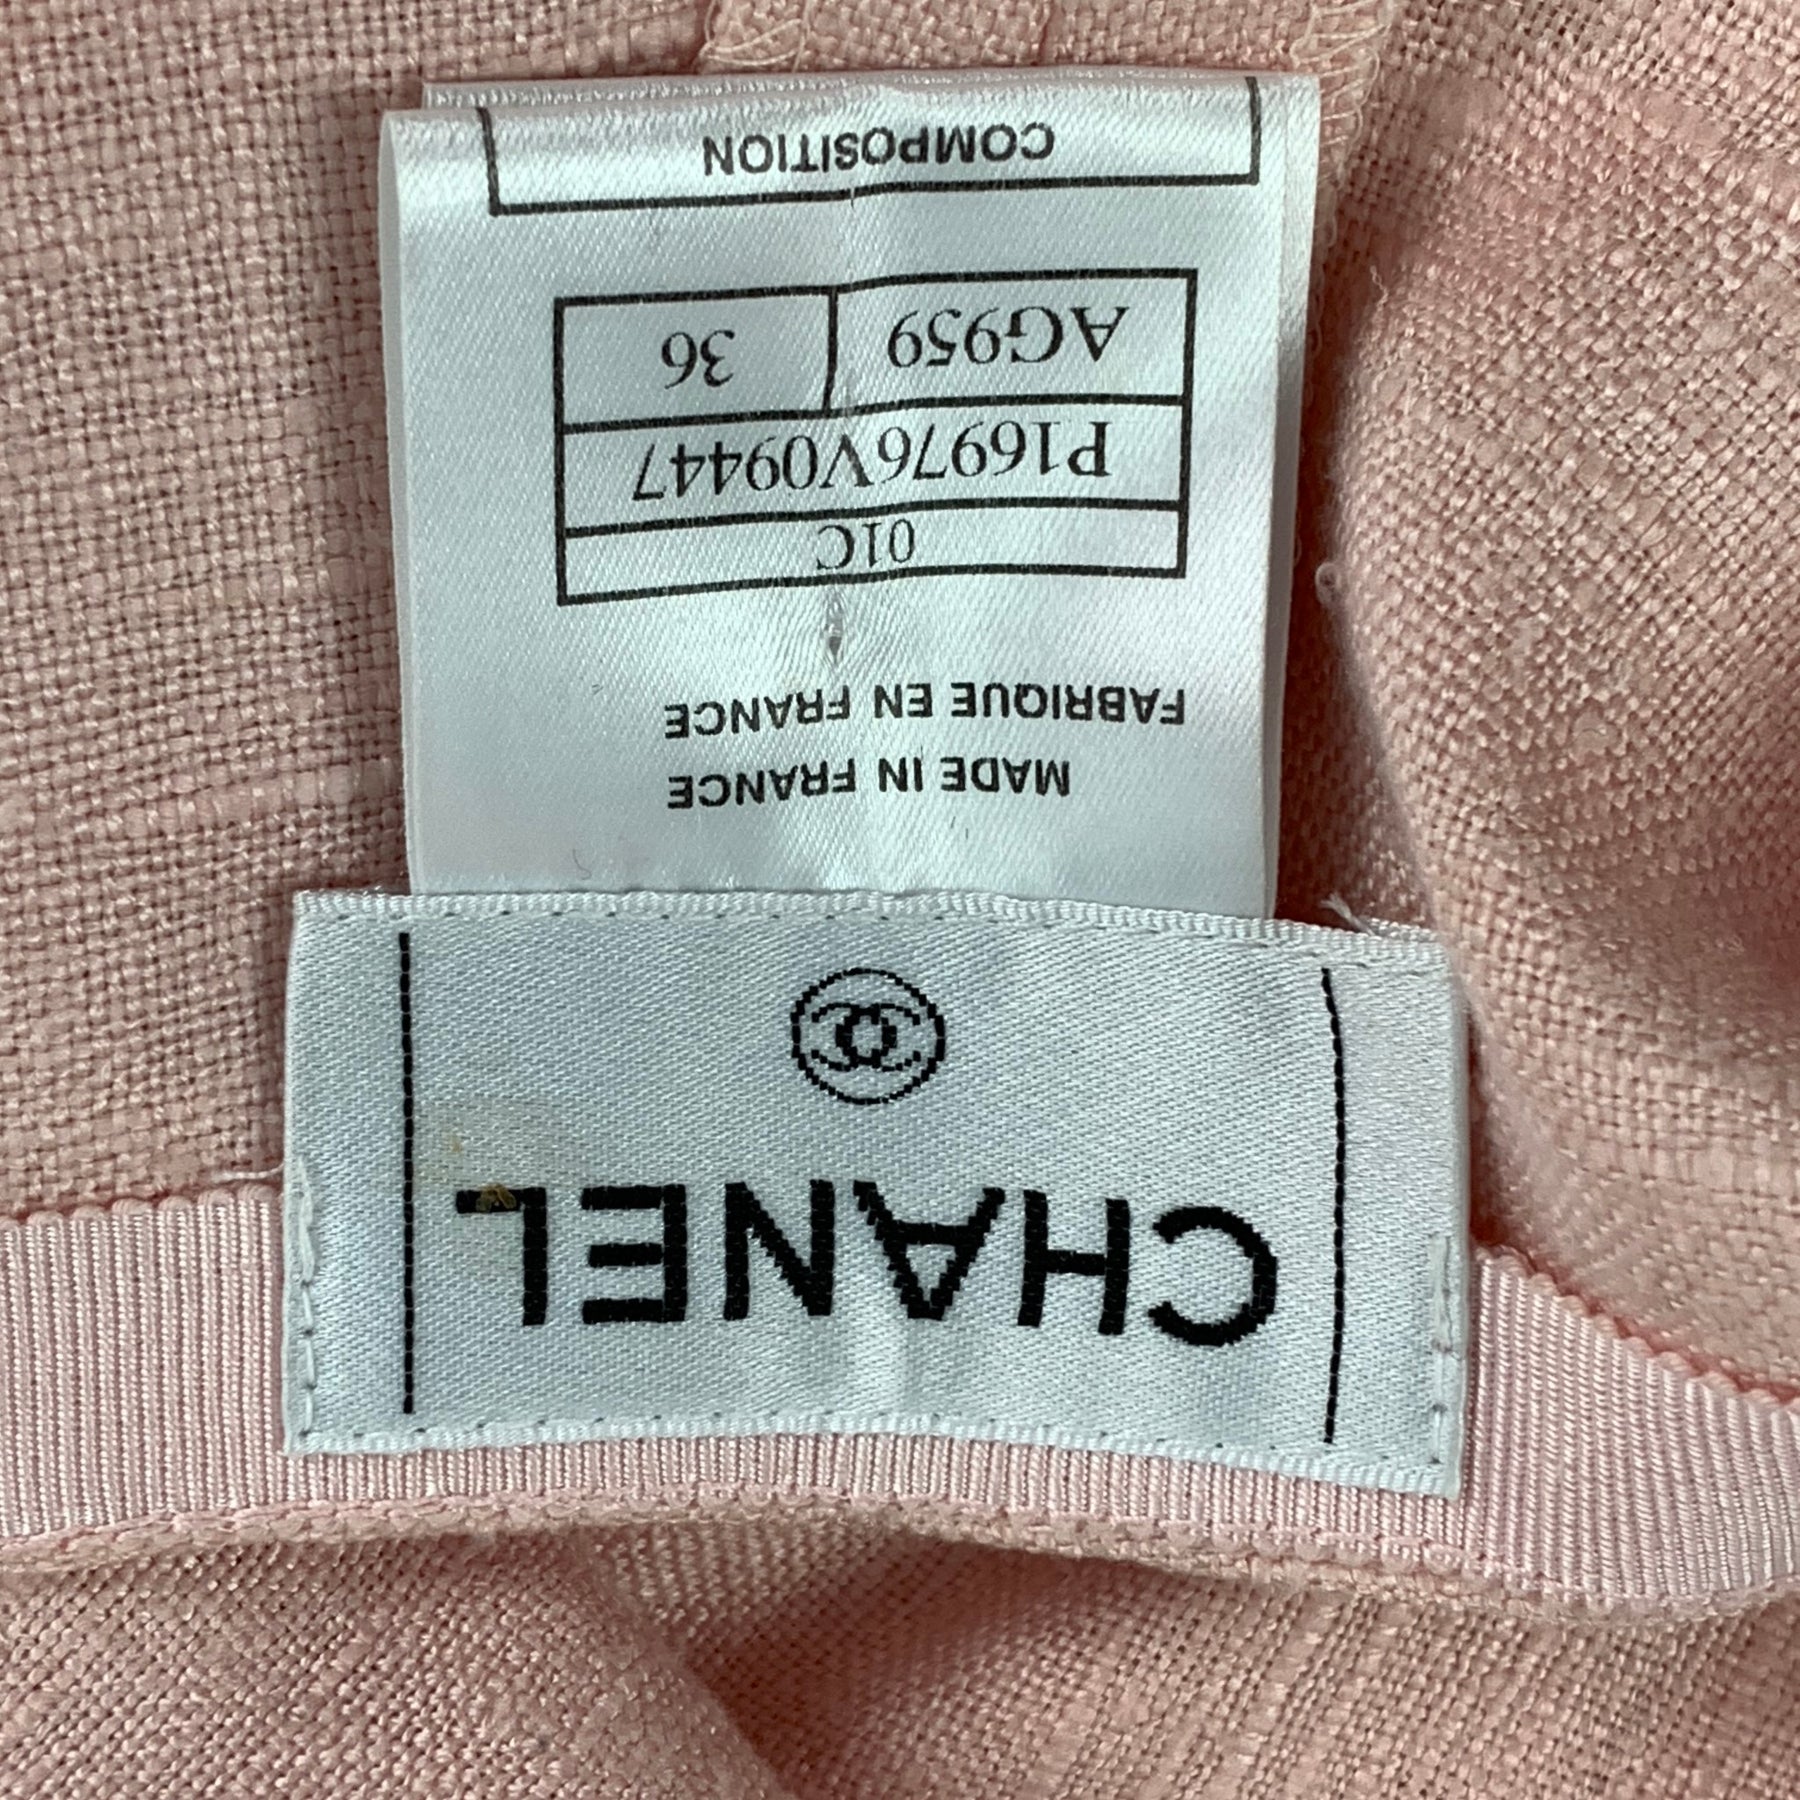 authentic chanel made in france label